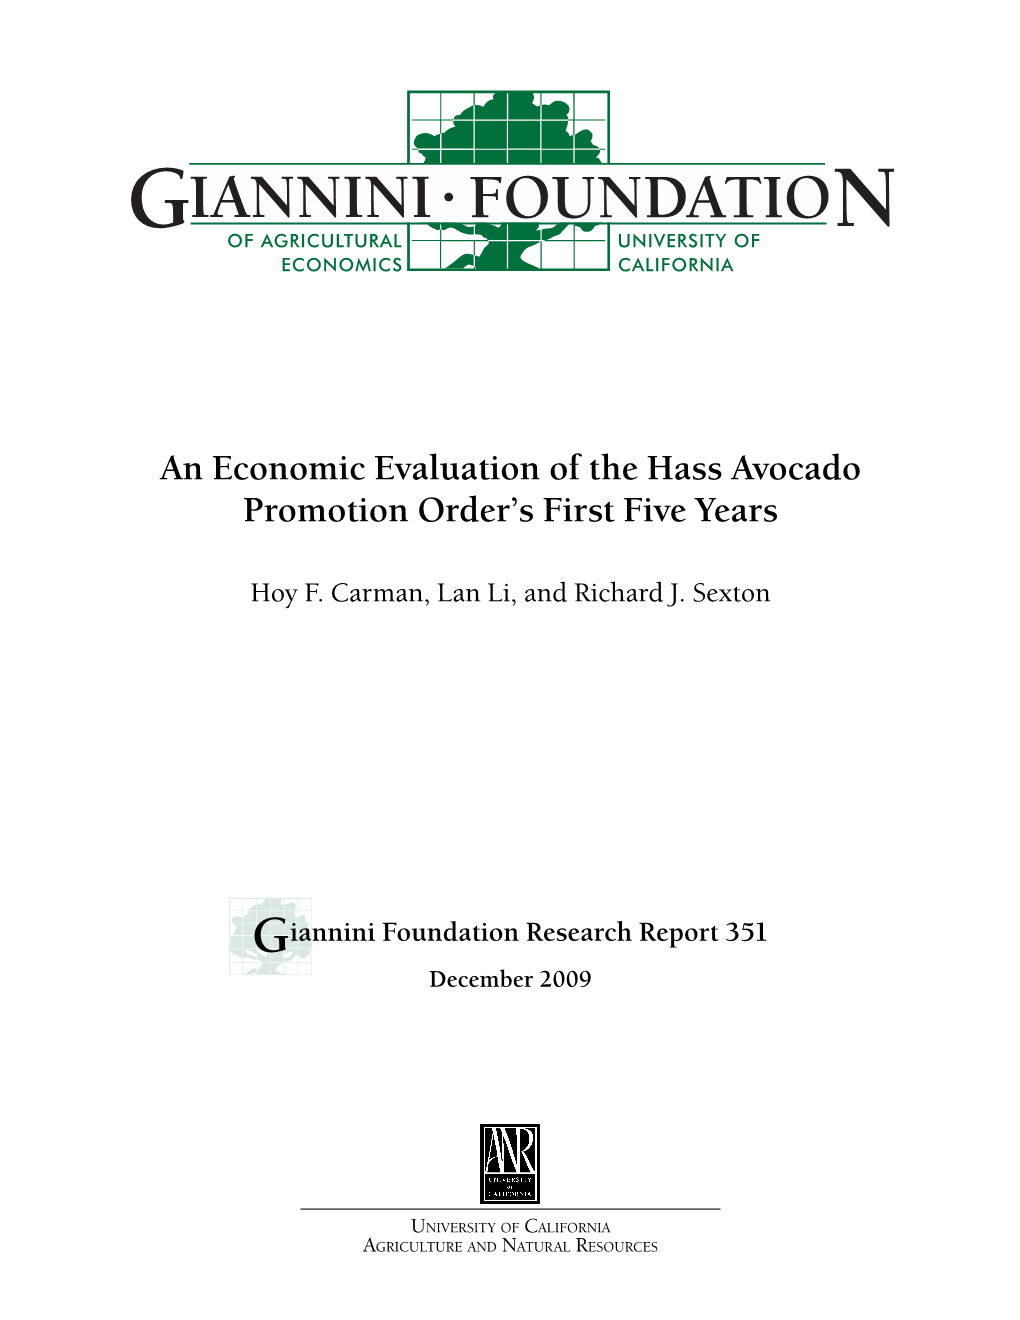 An Economic Evaluation of the Hass Avocado Promotion Order's First